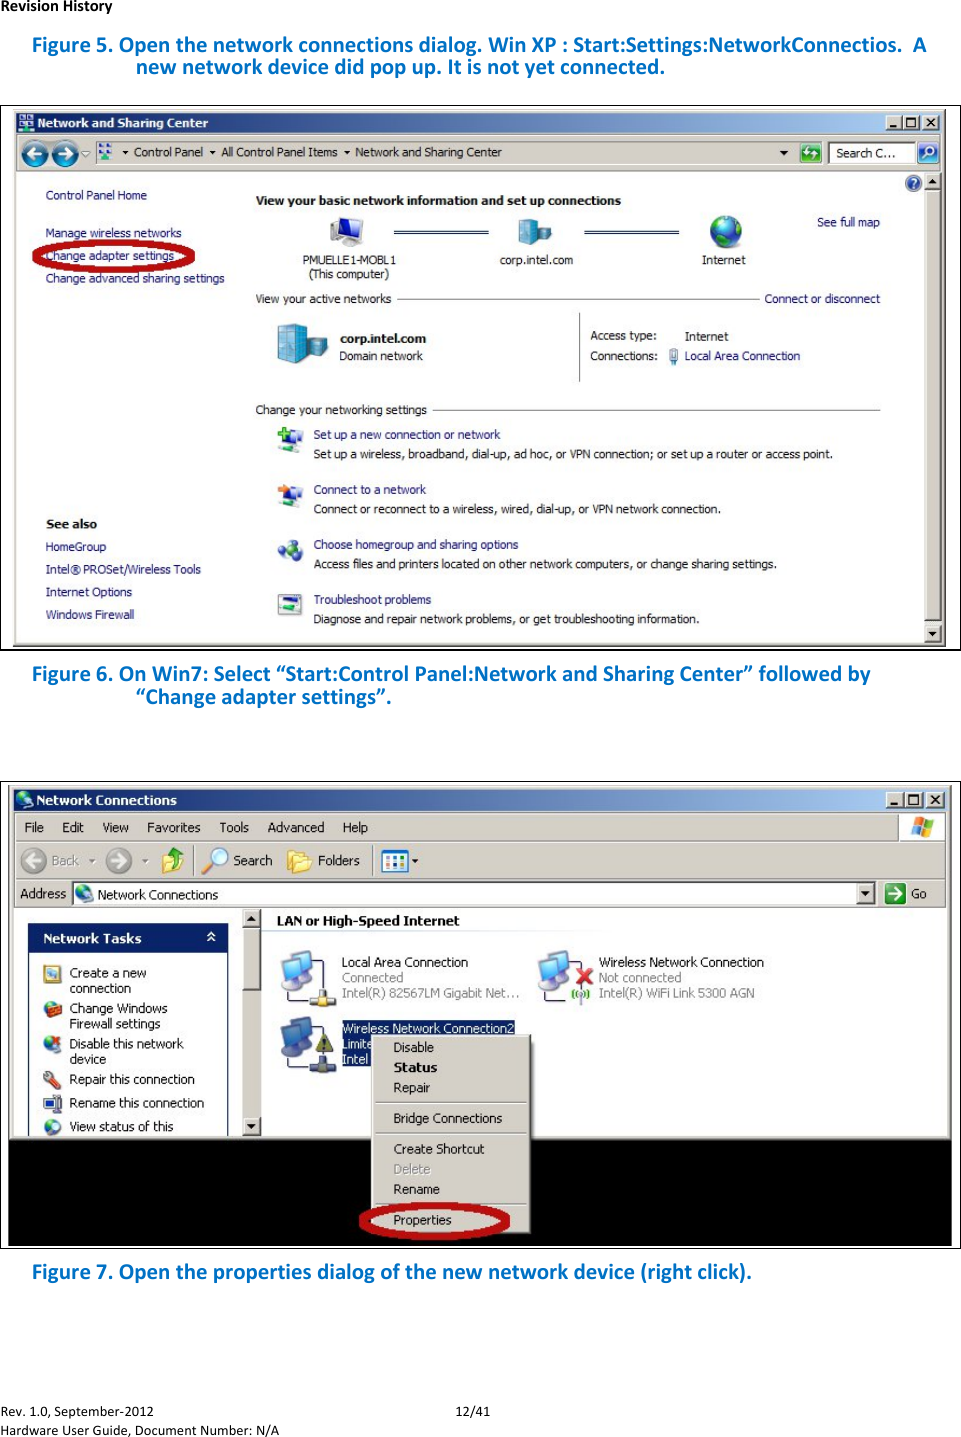    Revision History Rev. 1.0, September-2012 12/41 Hardware User Guide, Document Number: N/A Figure 5. Open the network connections dialog. Win XP : Start:Settings:NetworkConnectios.  A new network device did pop up. It is not yet connected.  Figure 6. On Win7: Select “Start:Control Panel:Network and Sharing Center” followed by  “Change adapter settings”.   Figure 7. Open the properties dialog of the new network device (right click). 